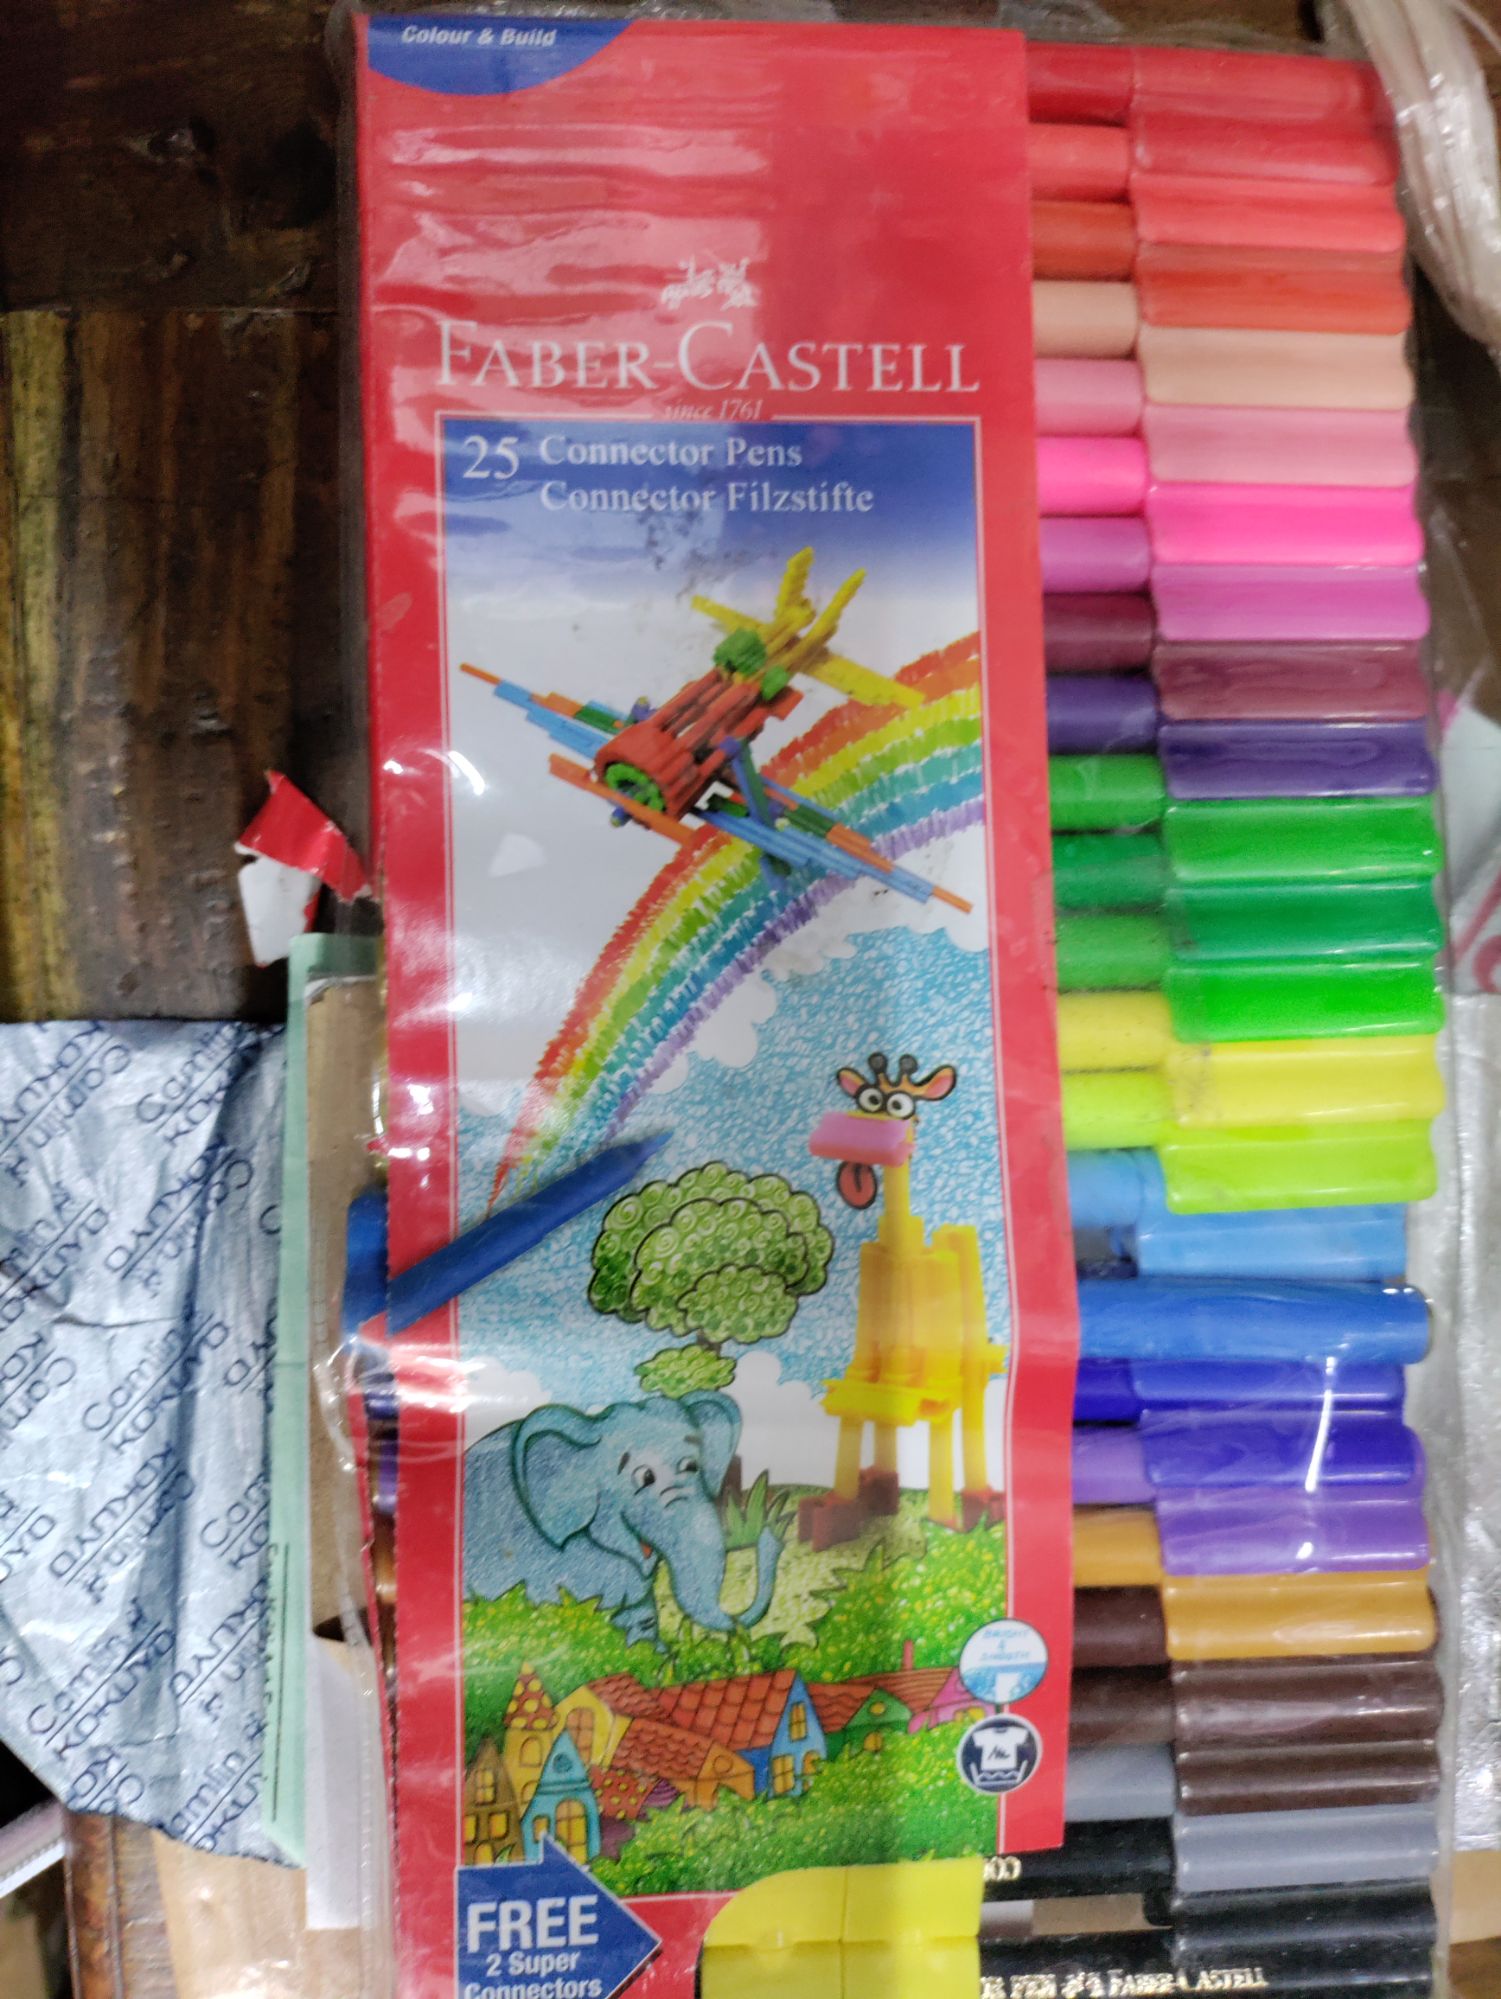 Faber-Castell Connector Pen Set - Pack of 25 (Assorted) - SBC Store